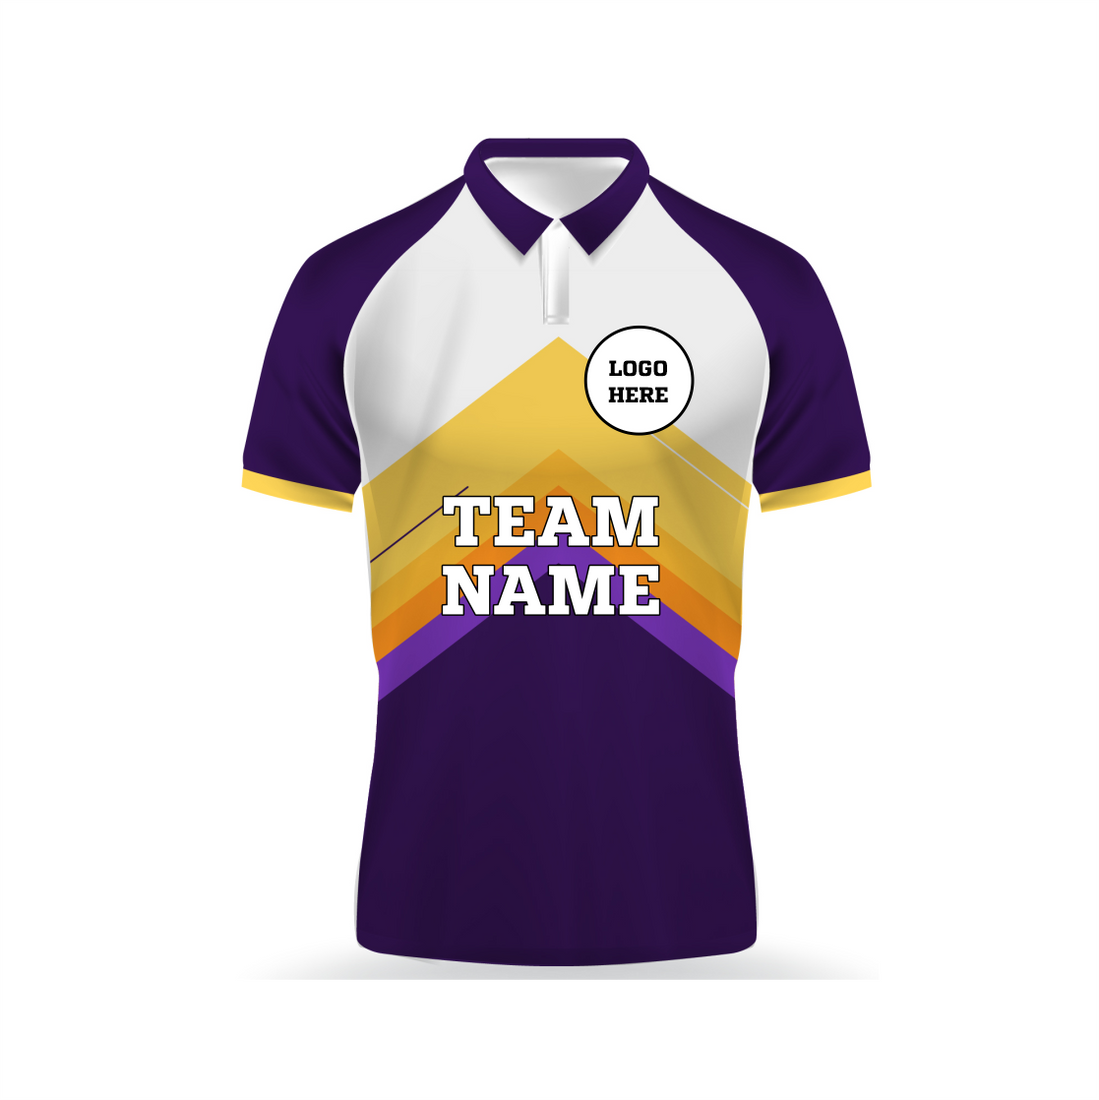 NEXT PRINT Customised Sublimation all Over  Printed T-Shirt Unisex Cricket Sports Jersey Player Name,  Player Number,Team Name and Logo.1875121075